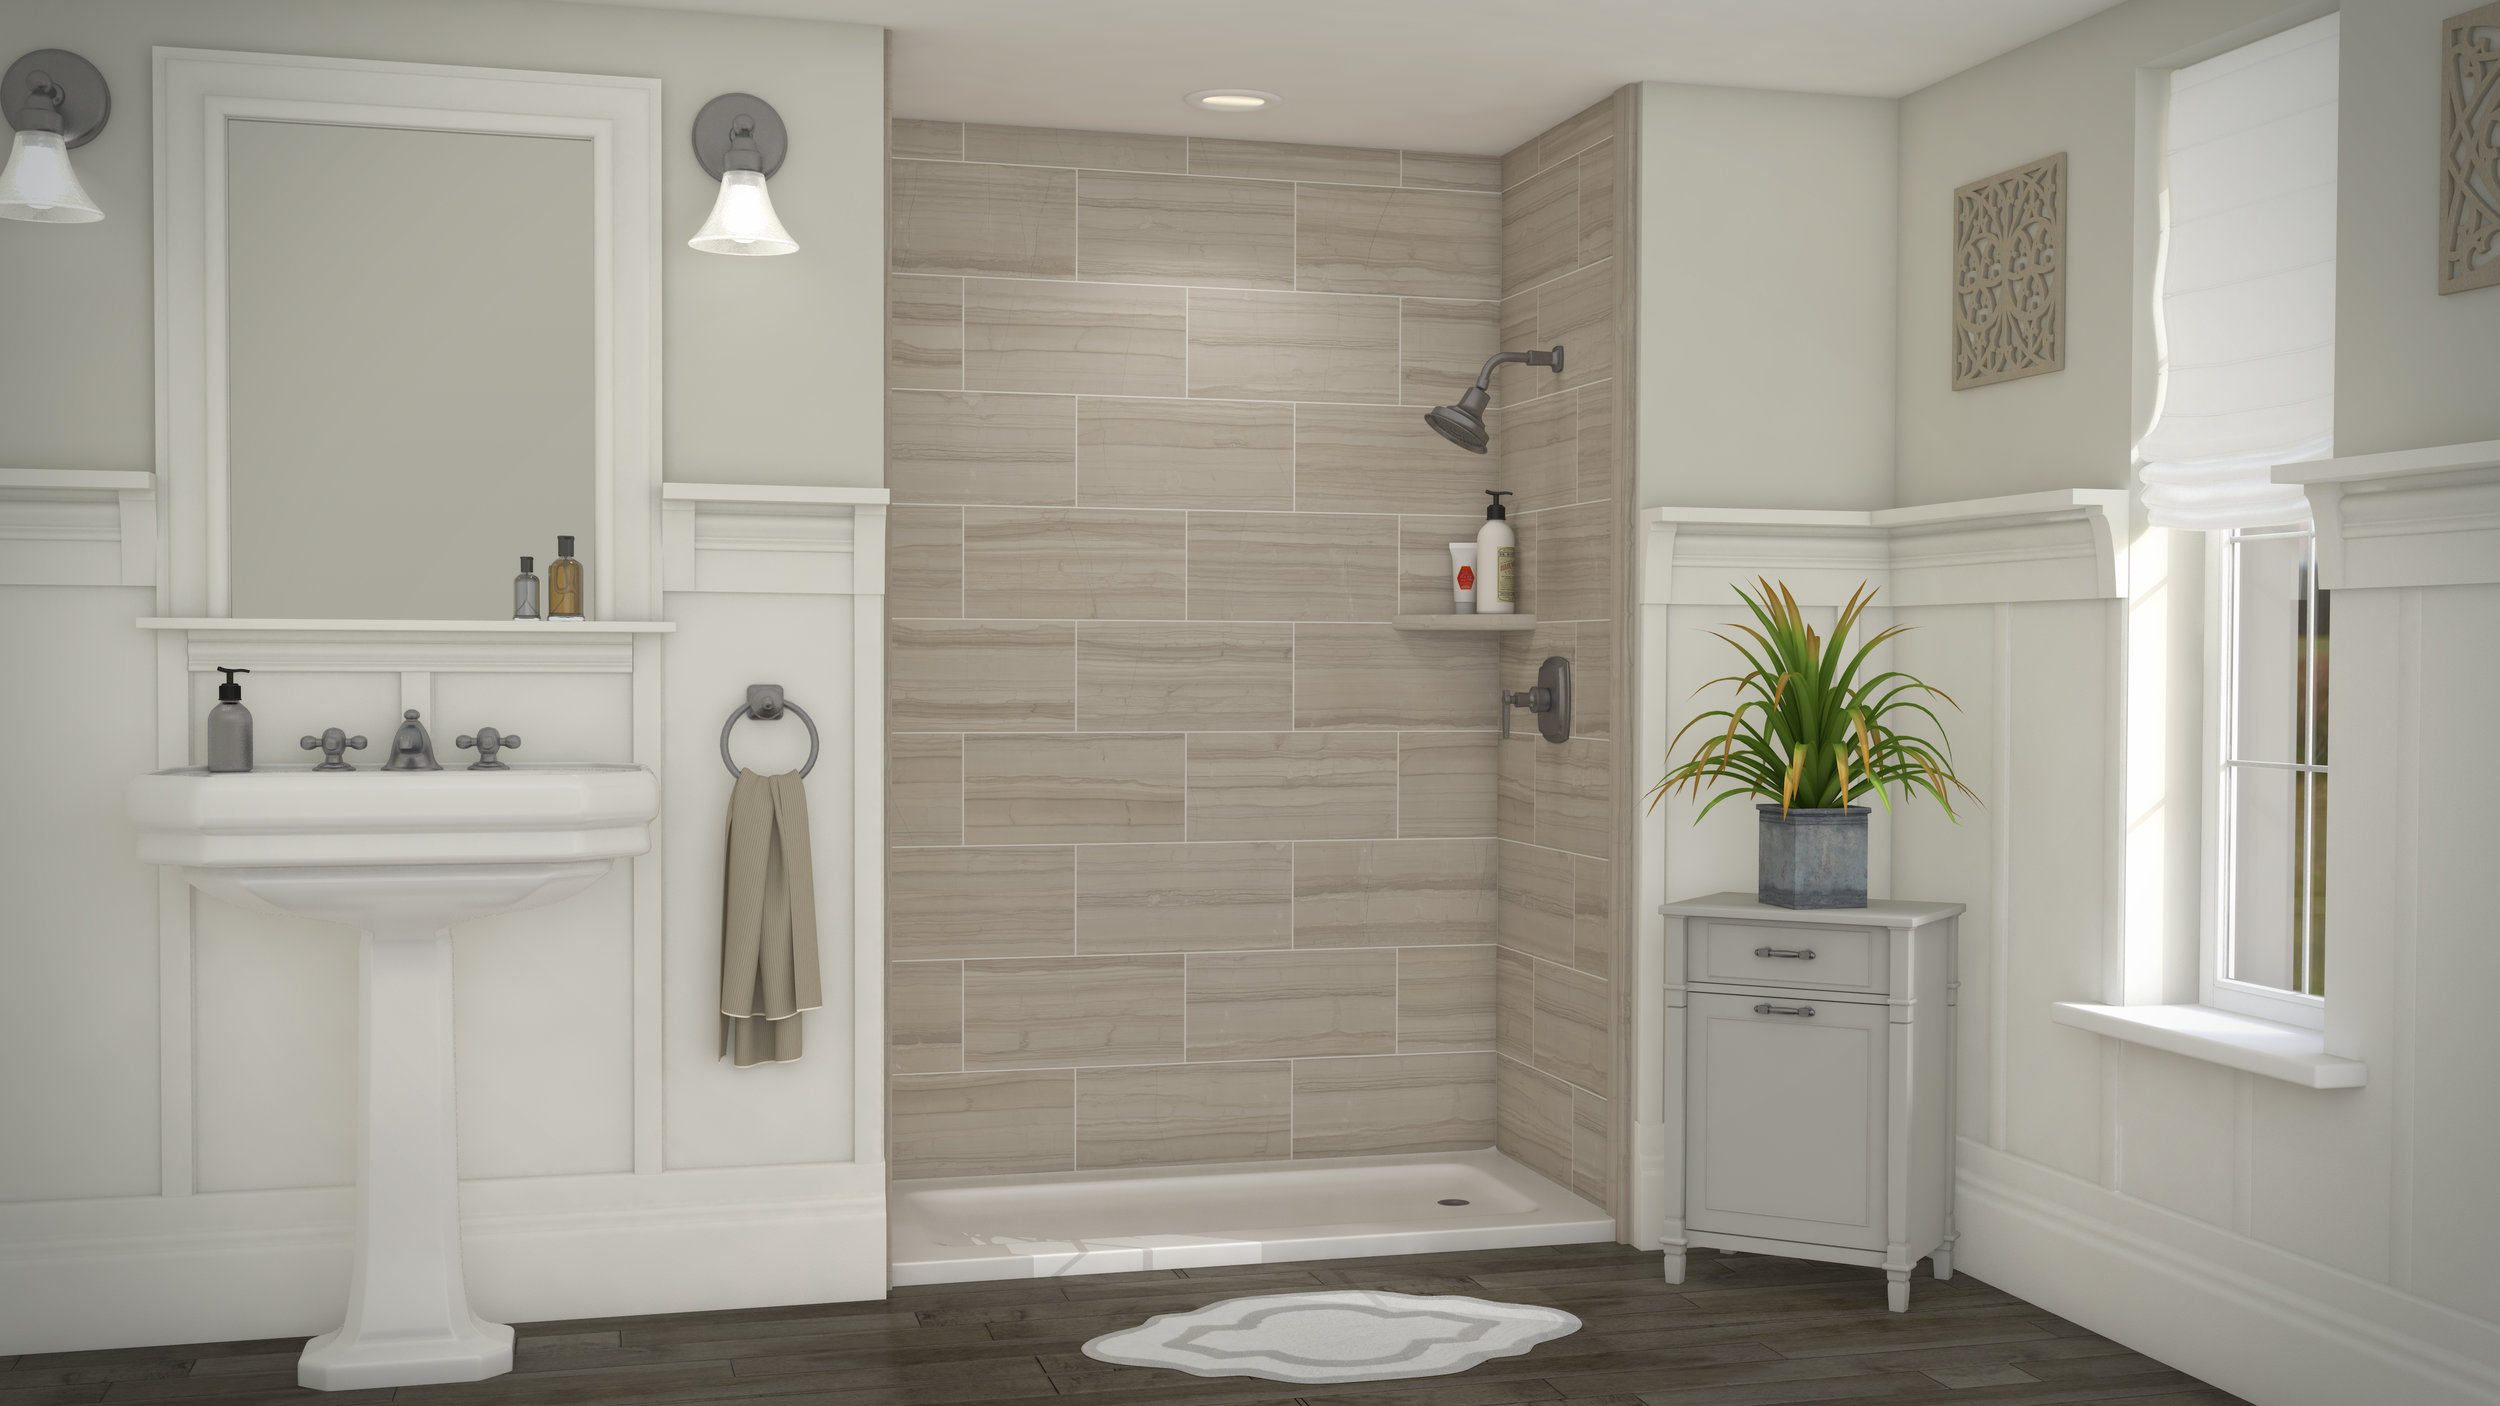 Know all you need to know about the local bathroom remodelers